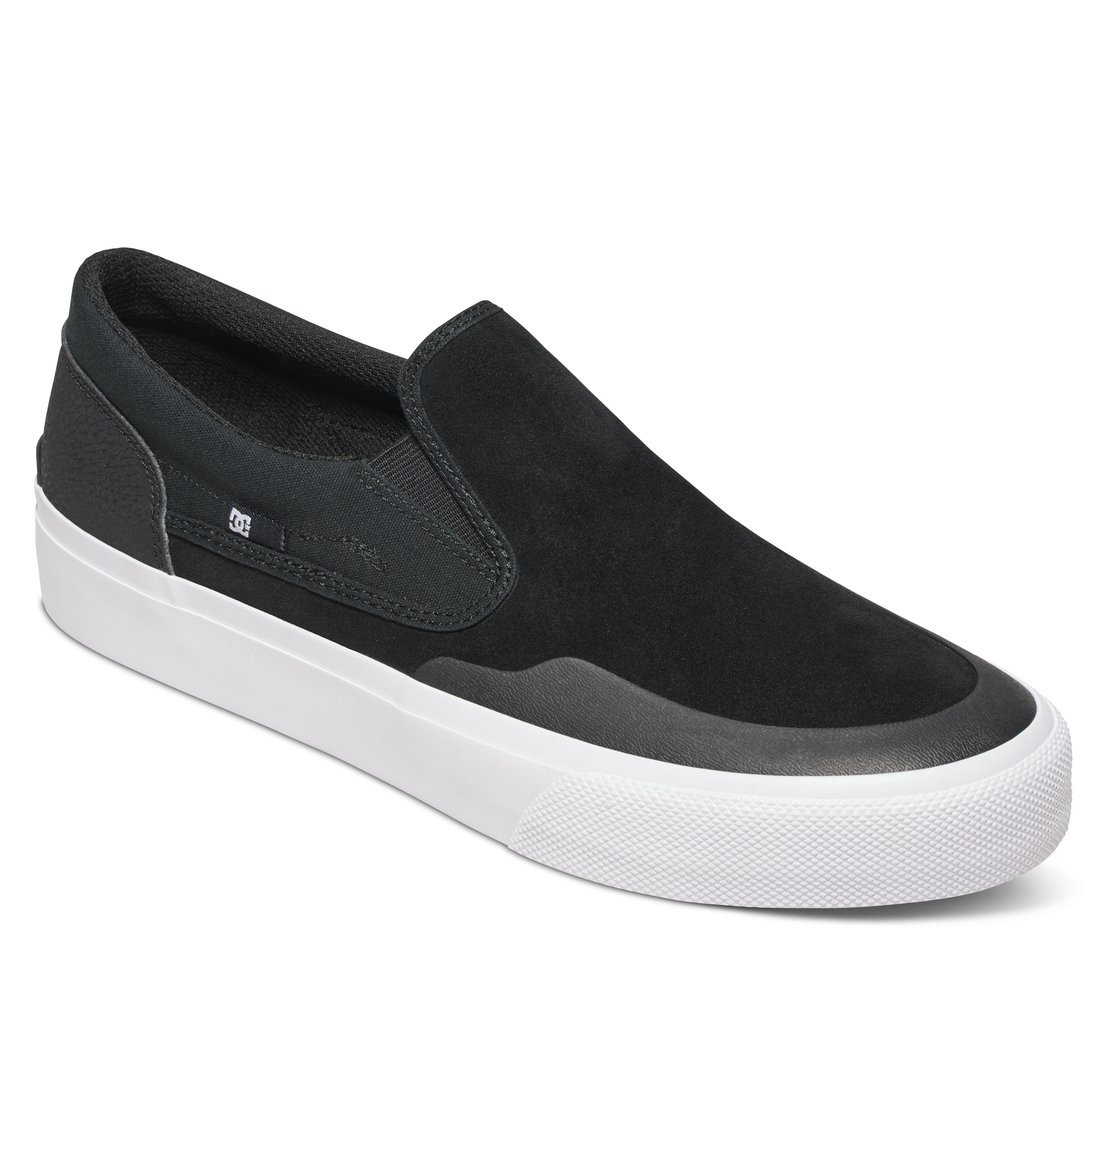 Men's Trase S RT Slip On Skate Shoes ADYS300357 | DC Shoes